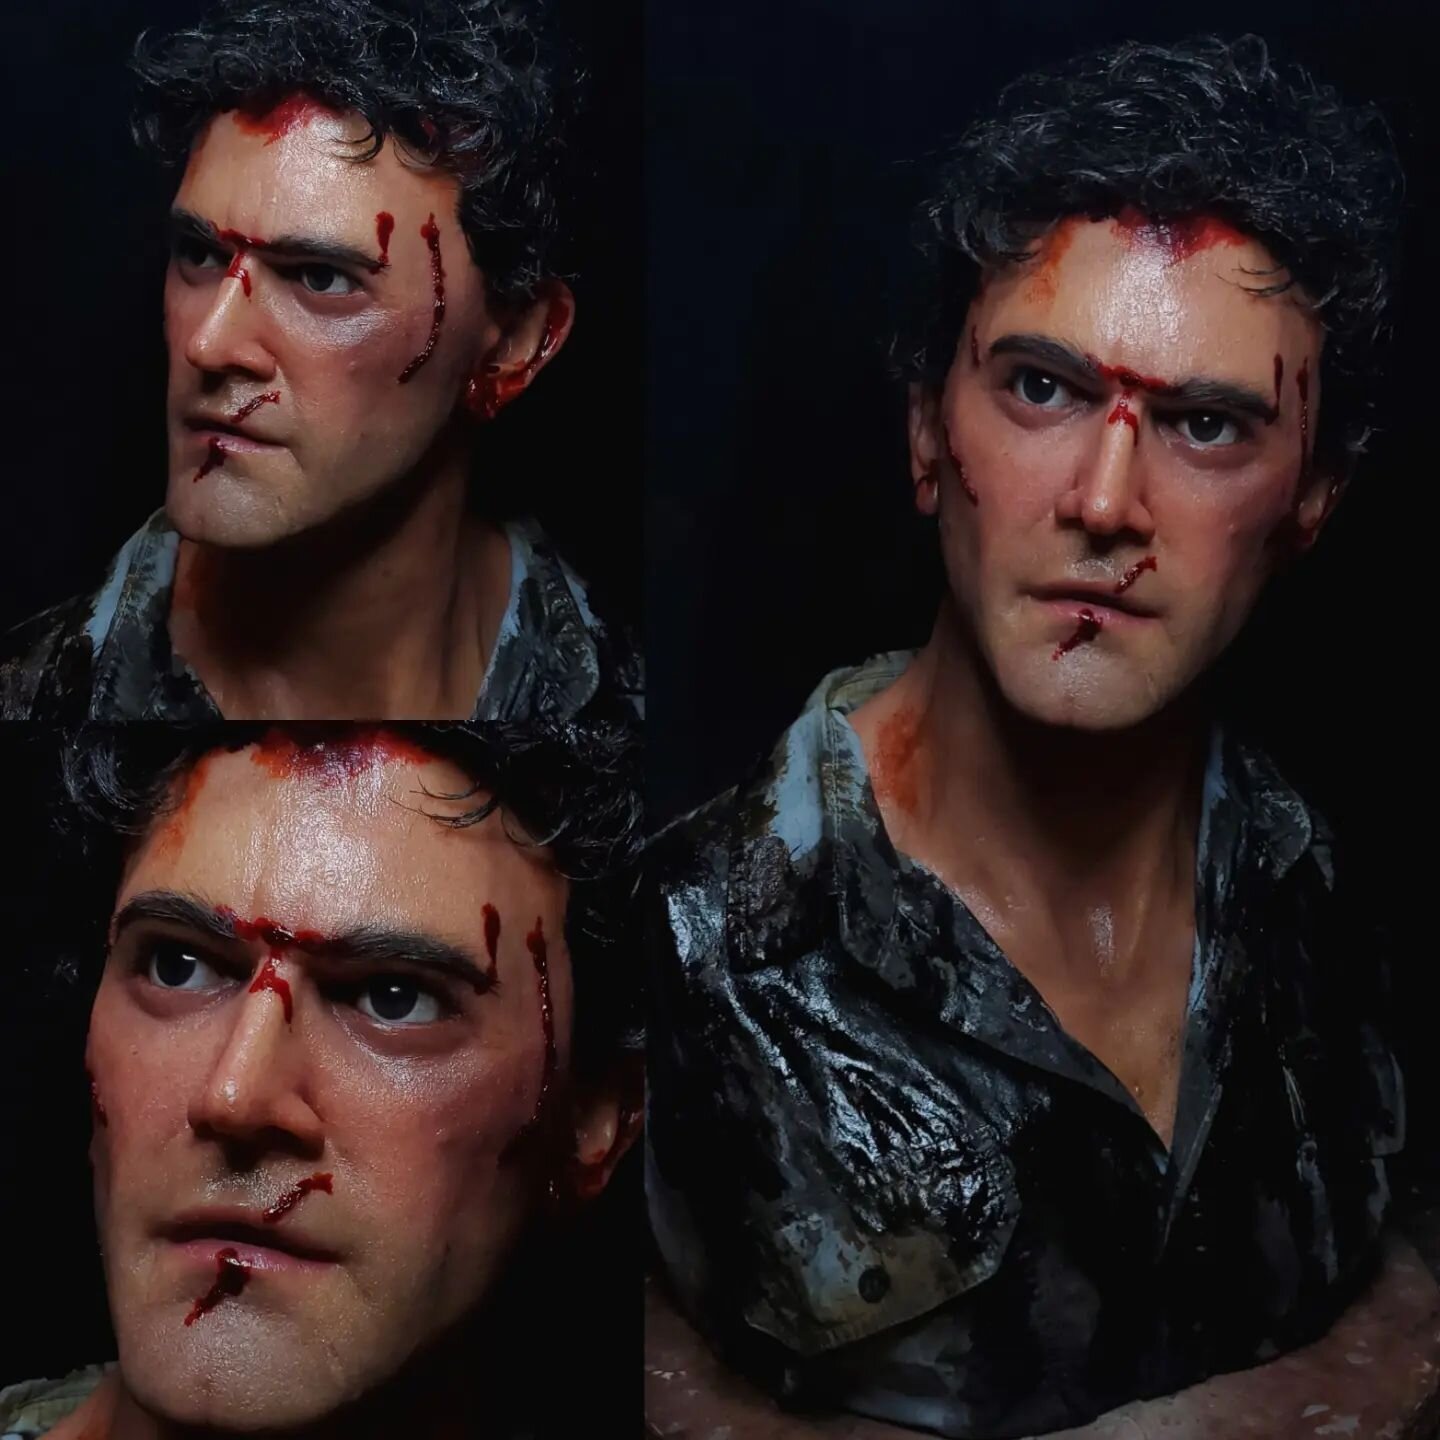 Finally finished this Ash bust from Evil Dead 2! This has been a dream project for years so I'm happy to finally finish this one! I ❤️ The Evil Dead! 

#fx #specialfx #sculpture #sculpt #ash #ashleywilliams #brucecampbell #evildead #evildead2 #armyof